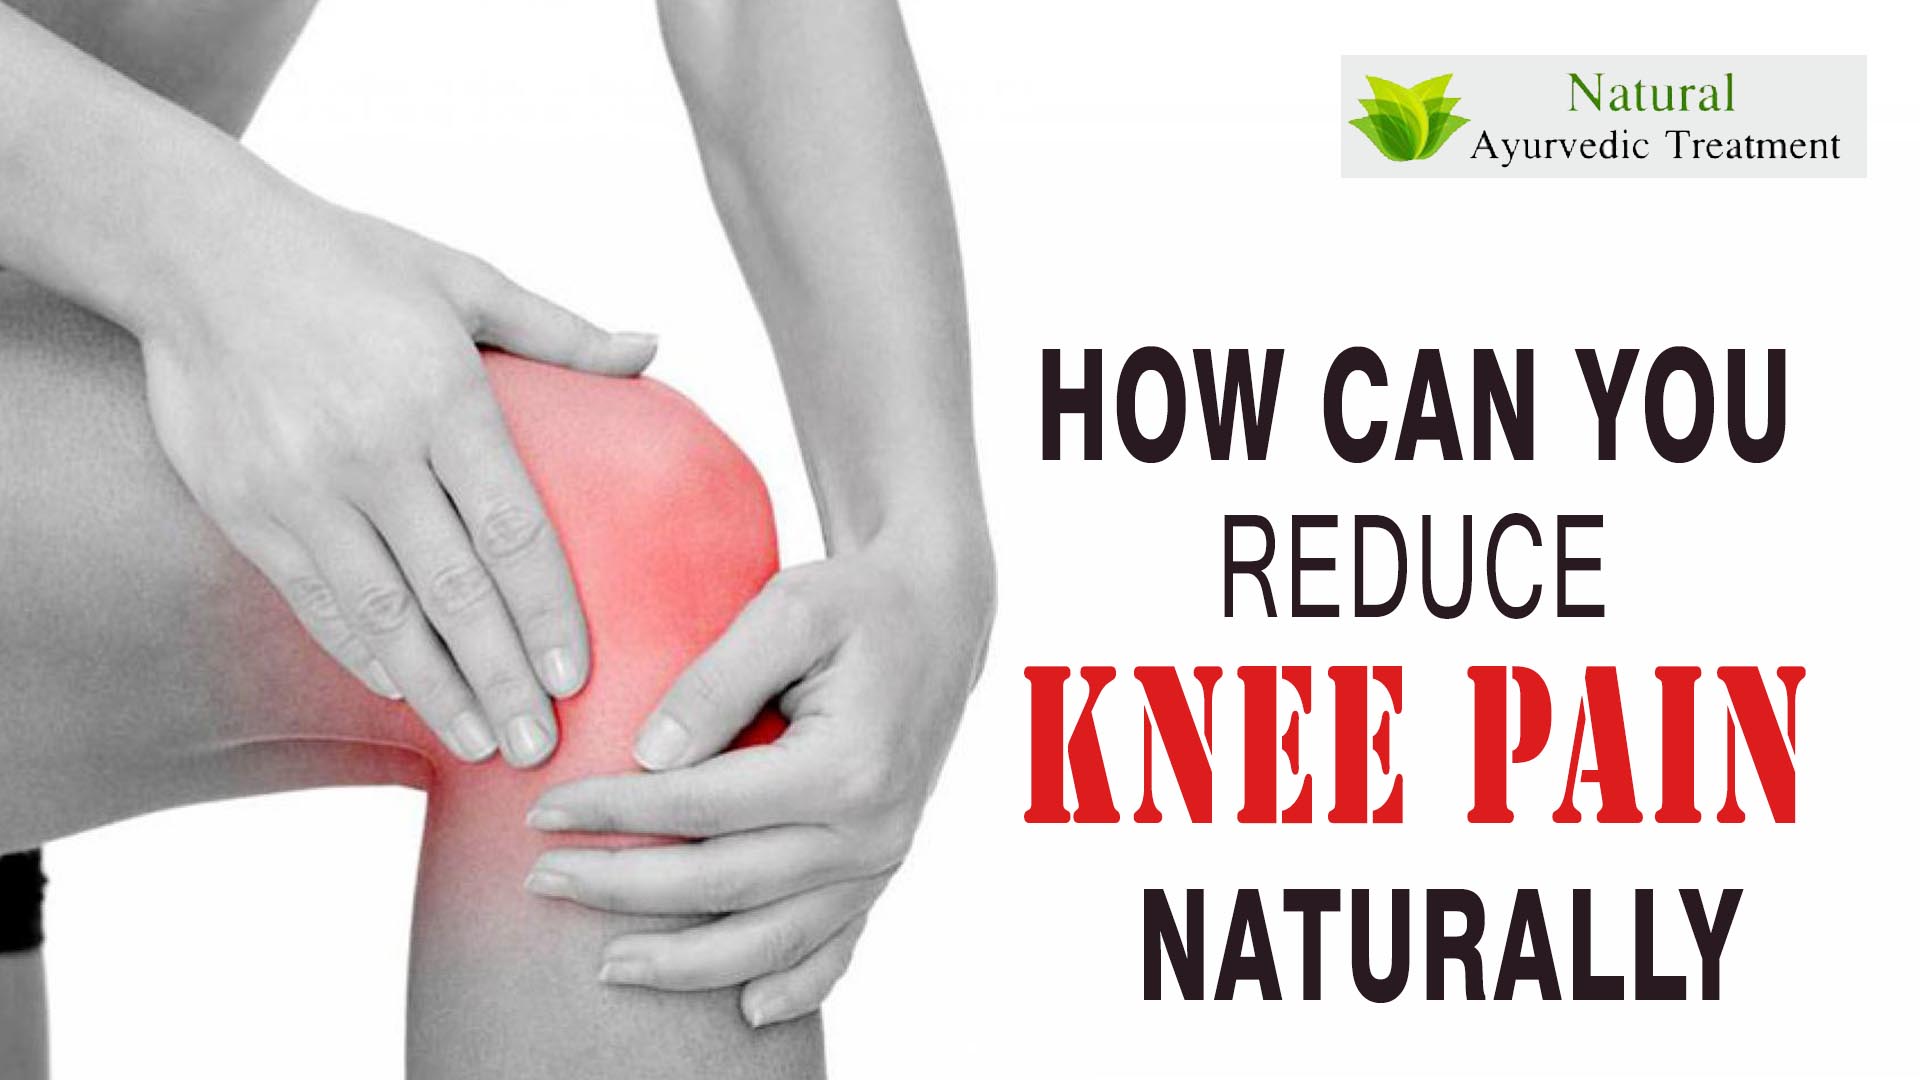 How Can You Reduce Knee Pain Naturally at Home?